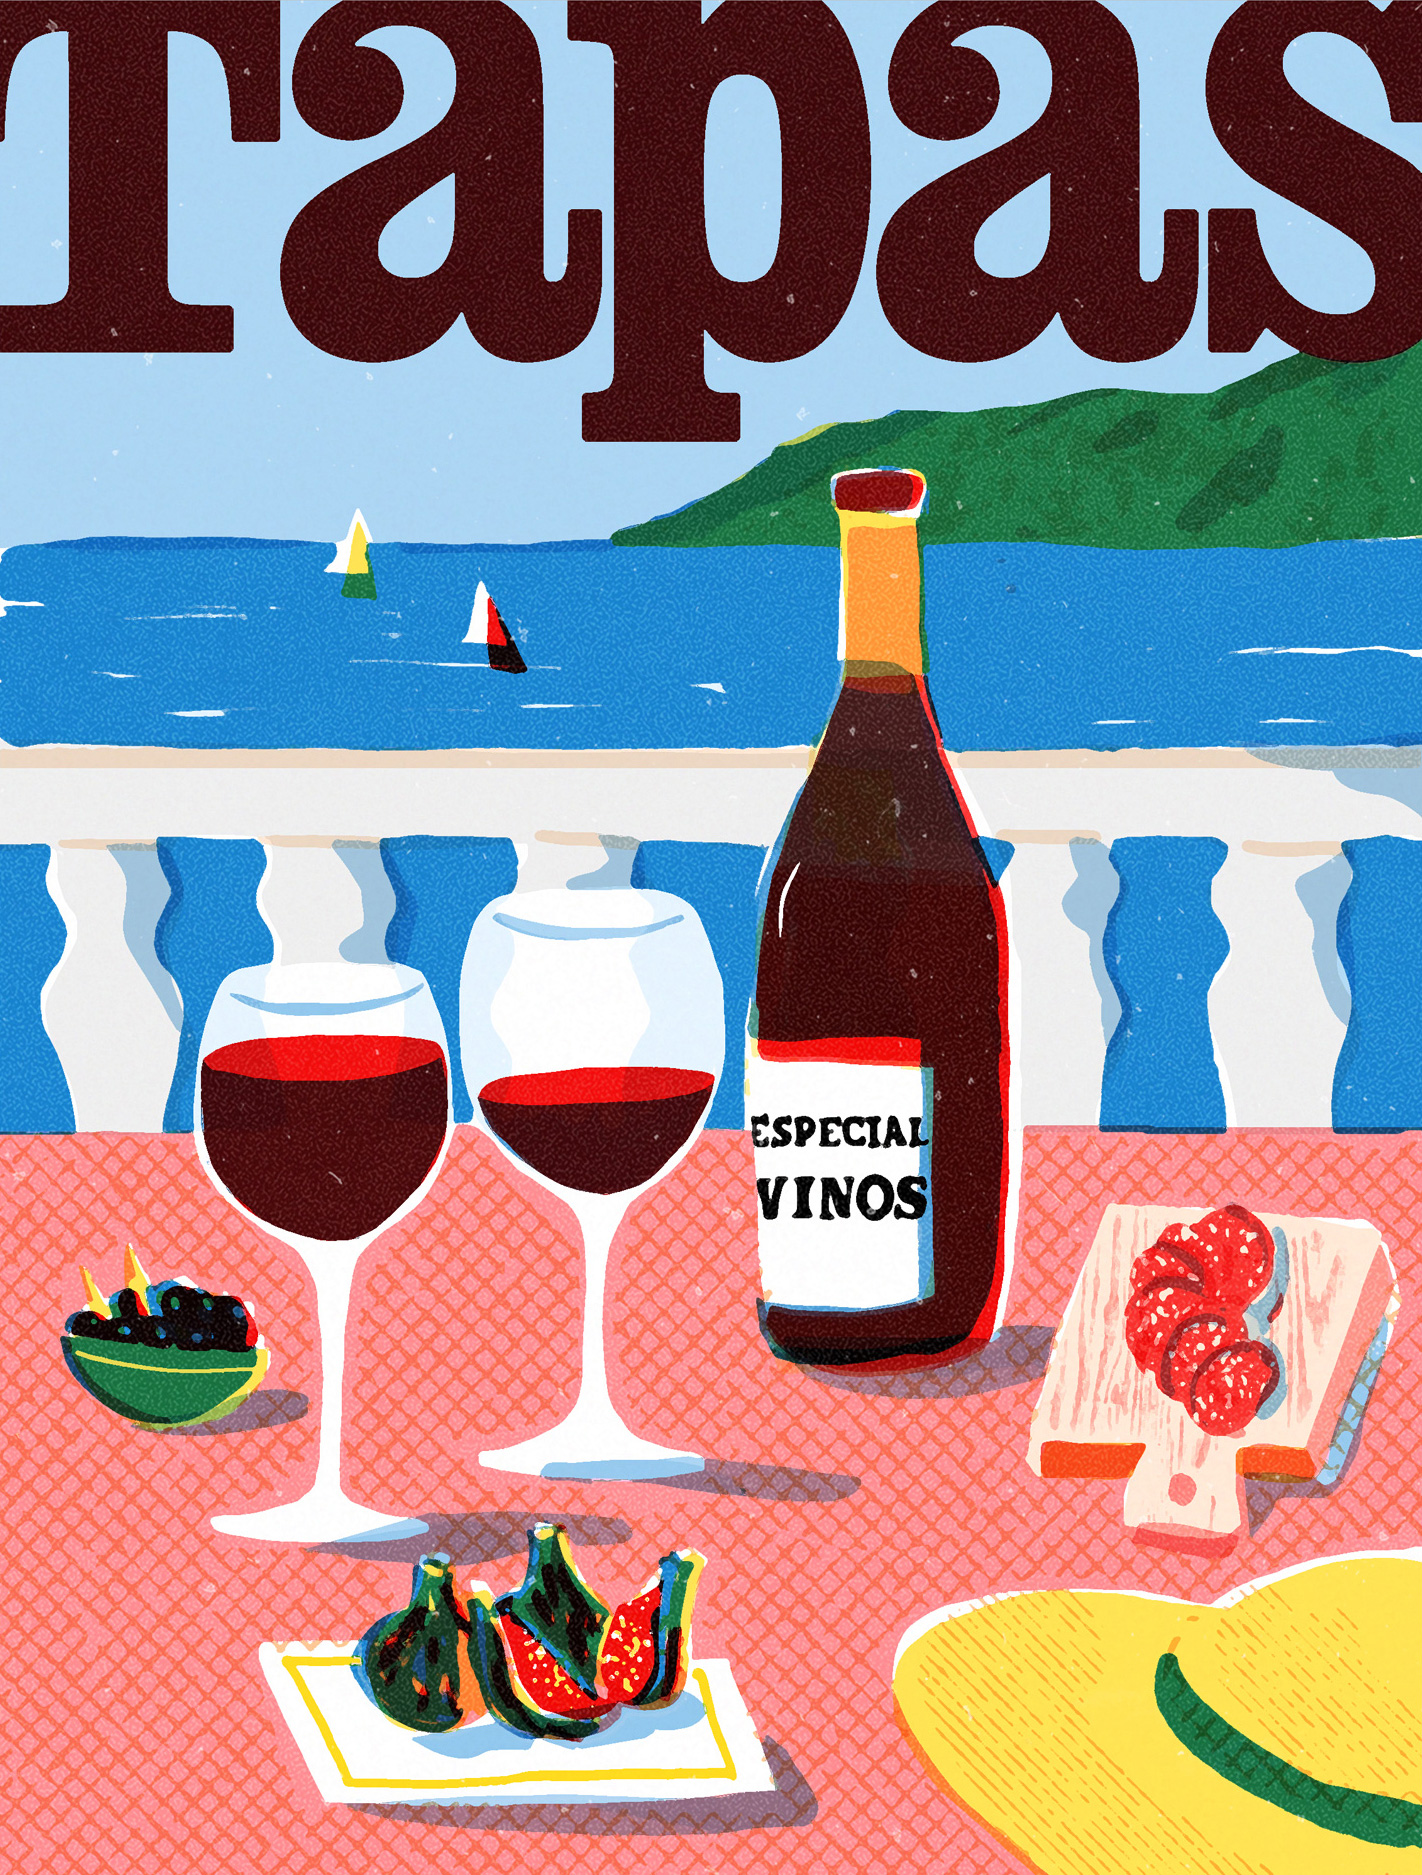 Cover illustration for tapas magazine (Spain) special about wines